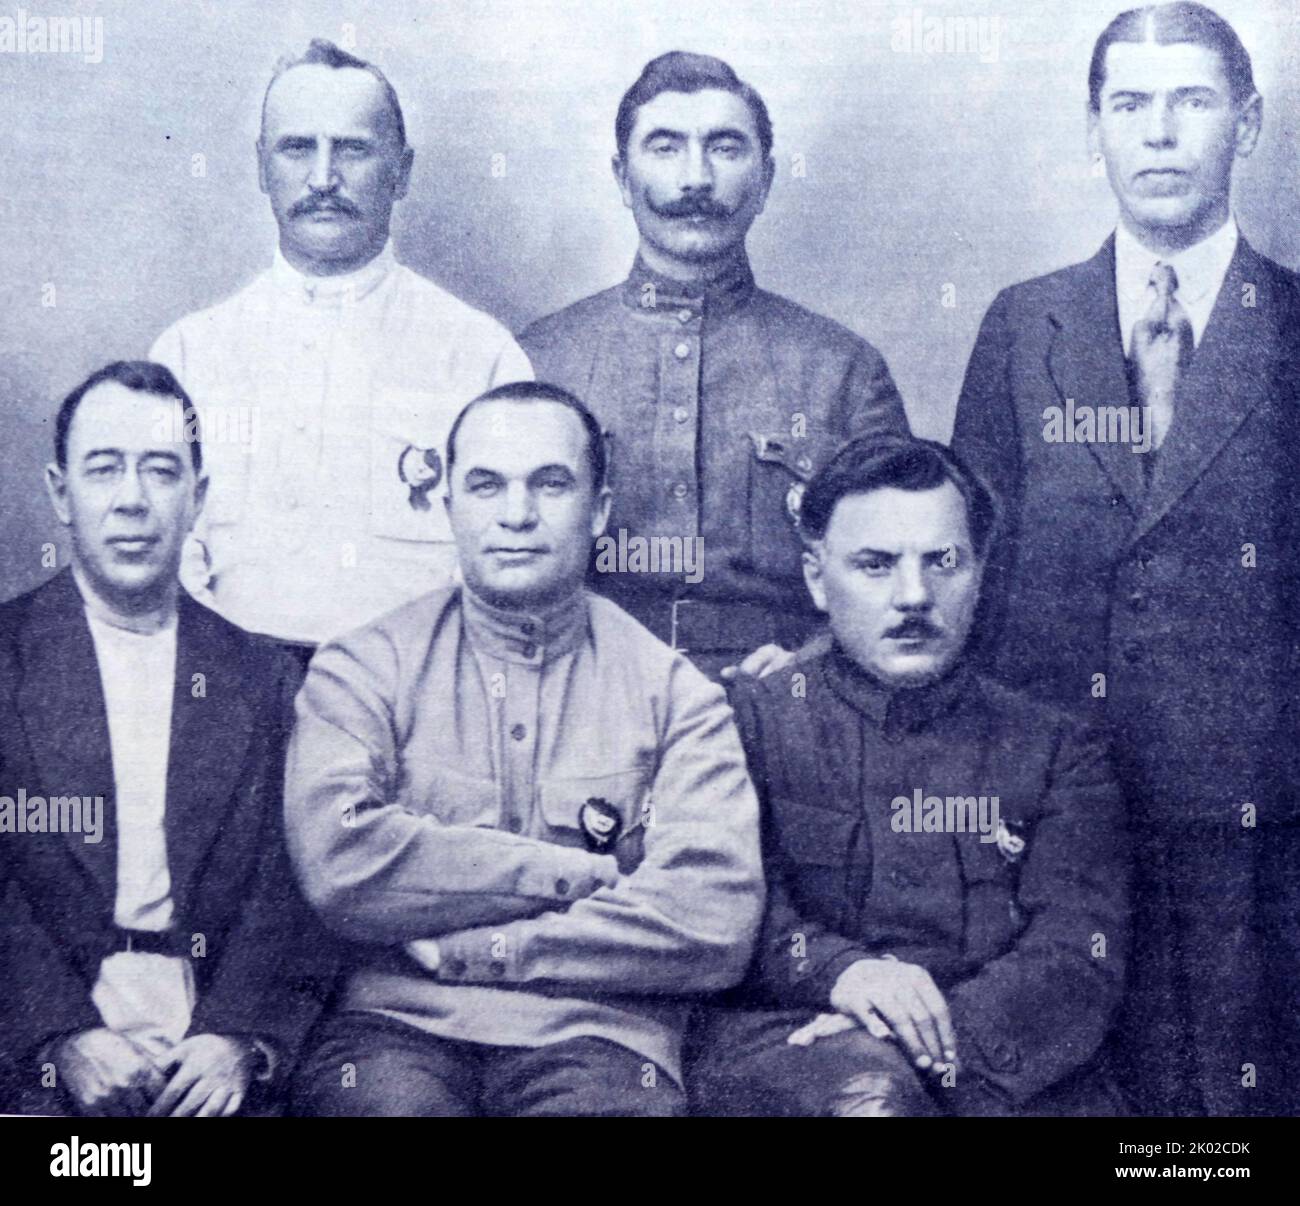 Sitting (from left to right): Member of Republics Revolutionary Military Council - S.I. Gusev; Commander of South-Western front units - A.I. Egorov; Member of Republics Revolutionary Military Council of the 1st cavalry army - K.E. Voroshilov; Standing: Commander of South-Western front office - N.N. Petin; Commander of 1st cavalry army - S.M. Budenny; Field Office Operating section chief of Republics Revolutionary Military Council - B.M. Shaposhnikov. Stock Photo